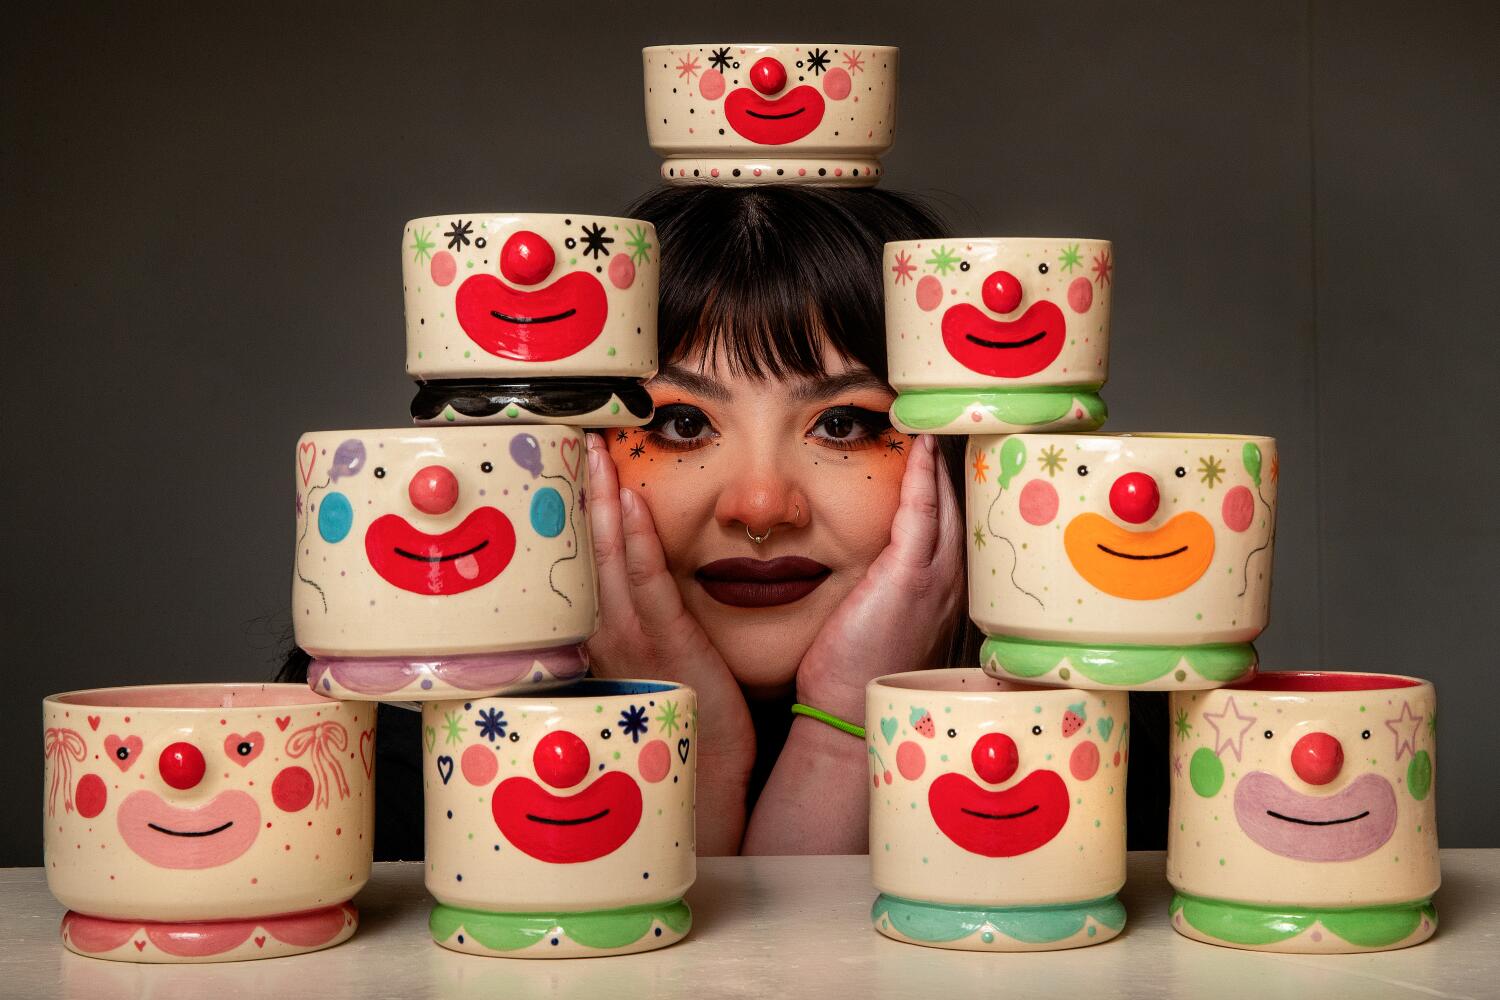 In a world of earth-toned pottery, her jubilant ceramic clowns spark delight